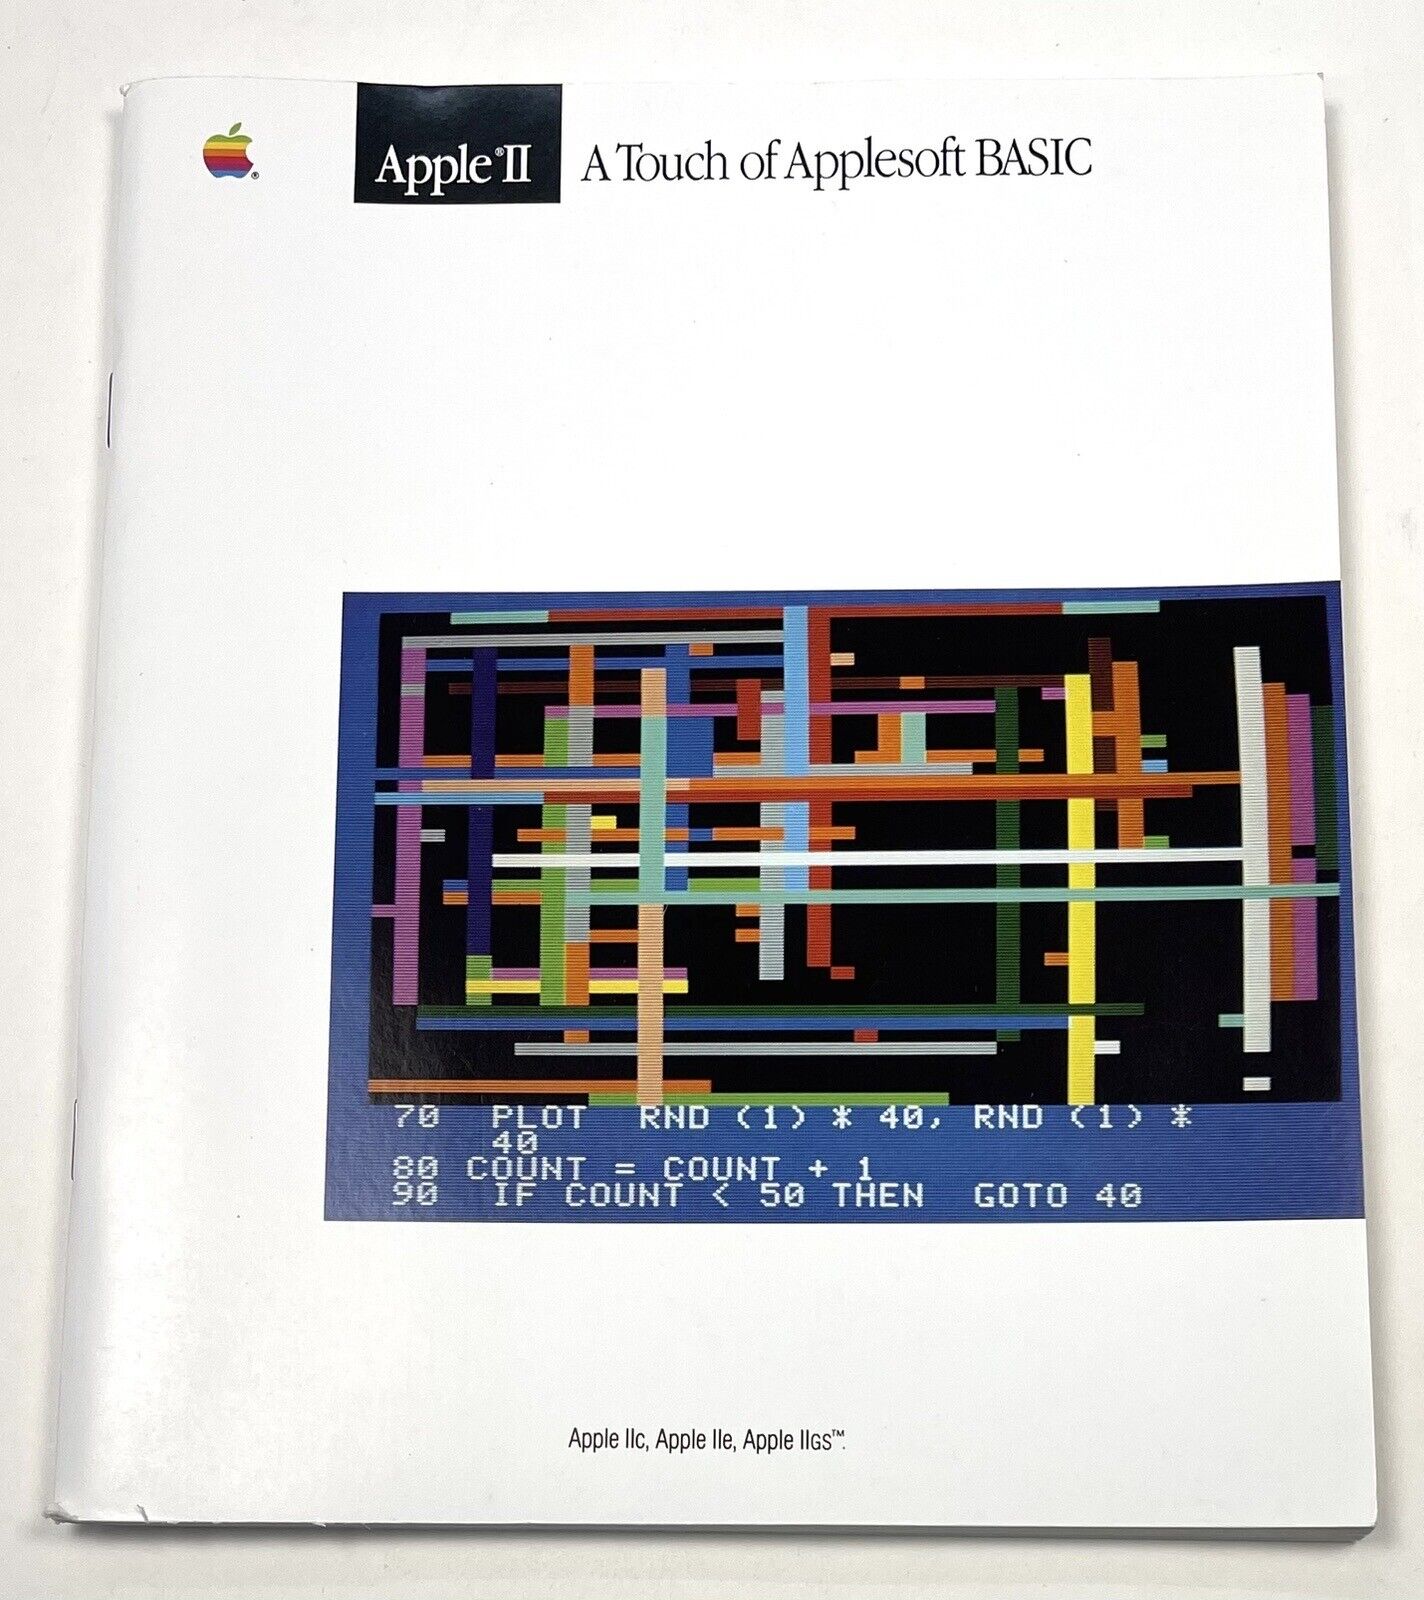 VTG 1986 Apple II A Touch of Applesoft BASIC OWNER'S MANUAL Instruction Booklet